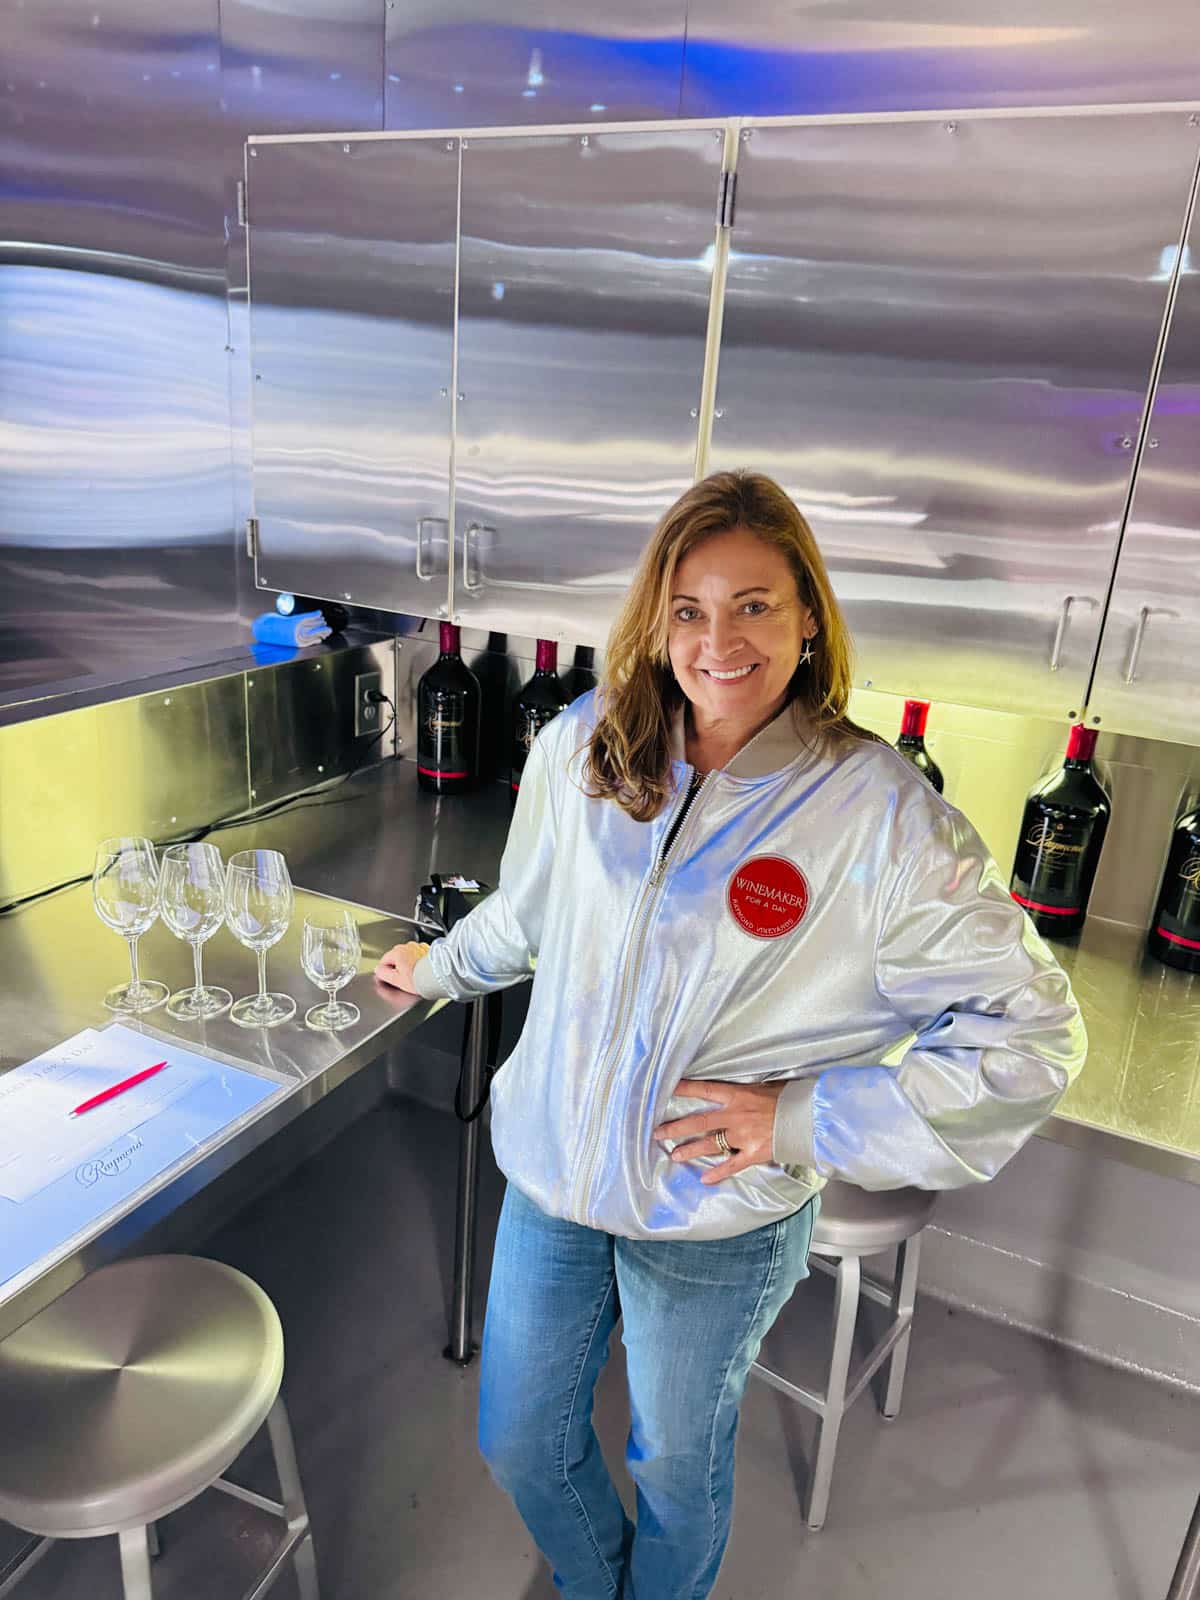 A woman in a silver jacket at a stainless counter with wineglasses and wine in the background.